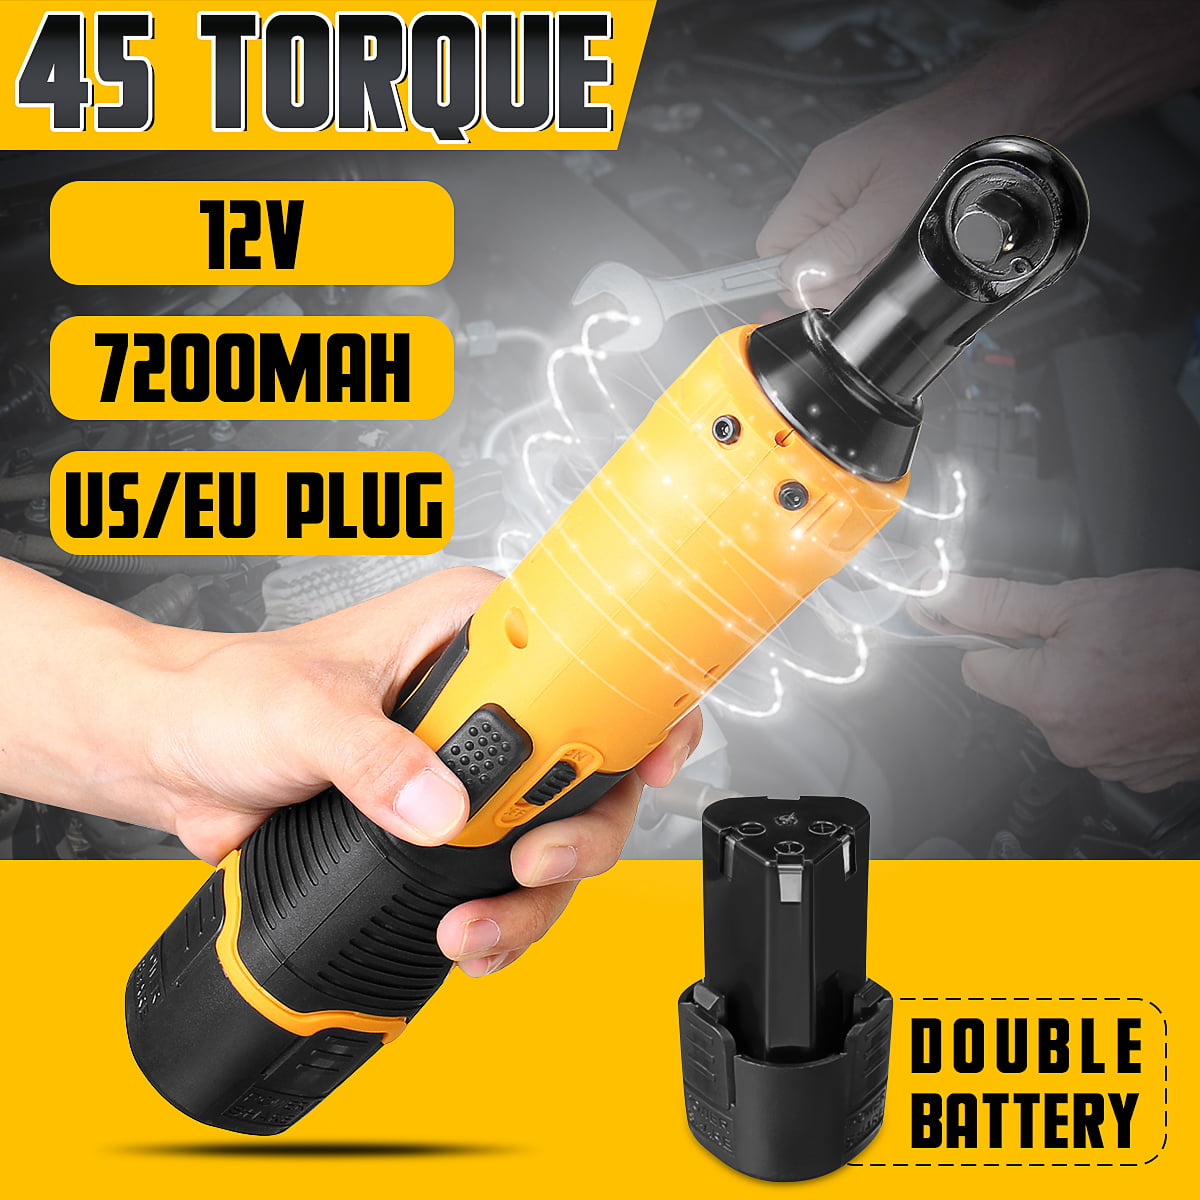 Electric Screwdriver SDH13DC Cordless Rechargeable Screwdriver 3.6V 2.0Ah Lithium Ion Battery MAX Torque 4N.m Front LED and Rear Flashlight 3 Flexible Position and 6 Torque Setting 